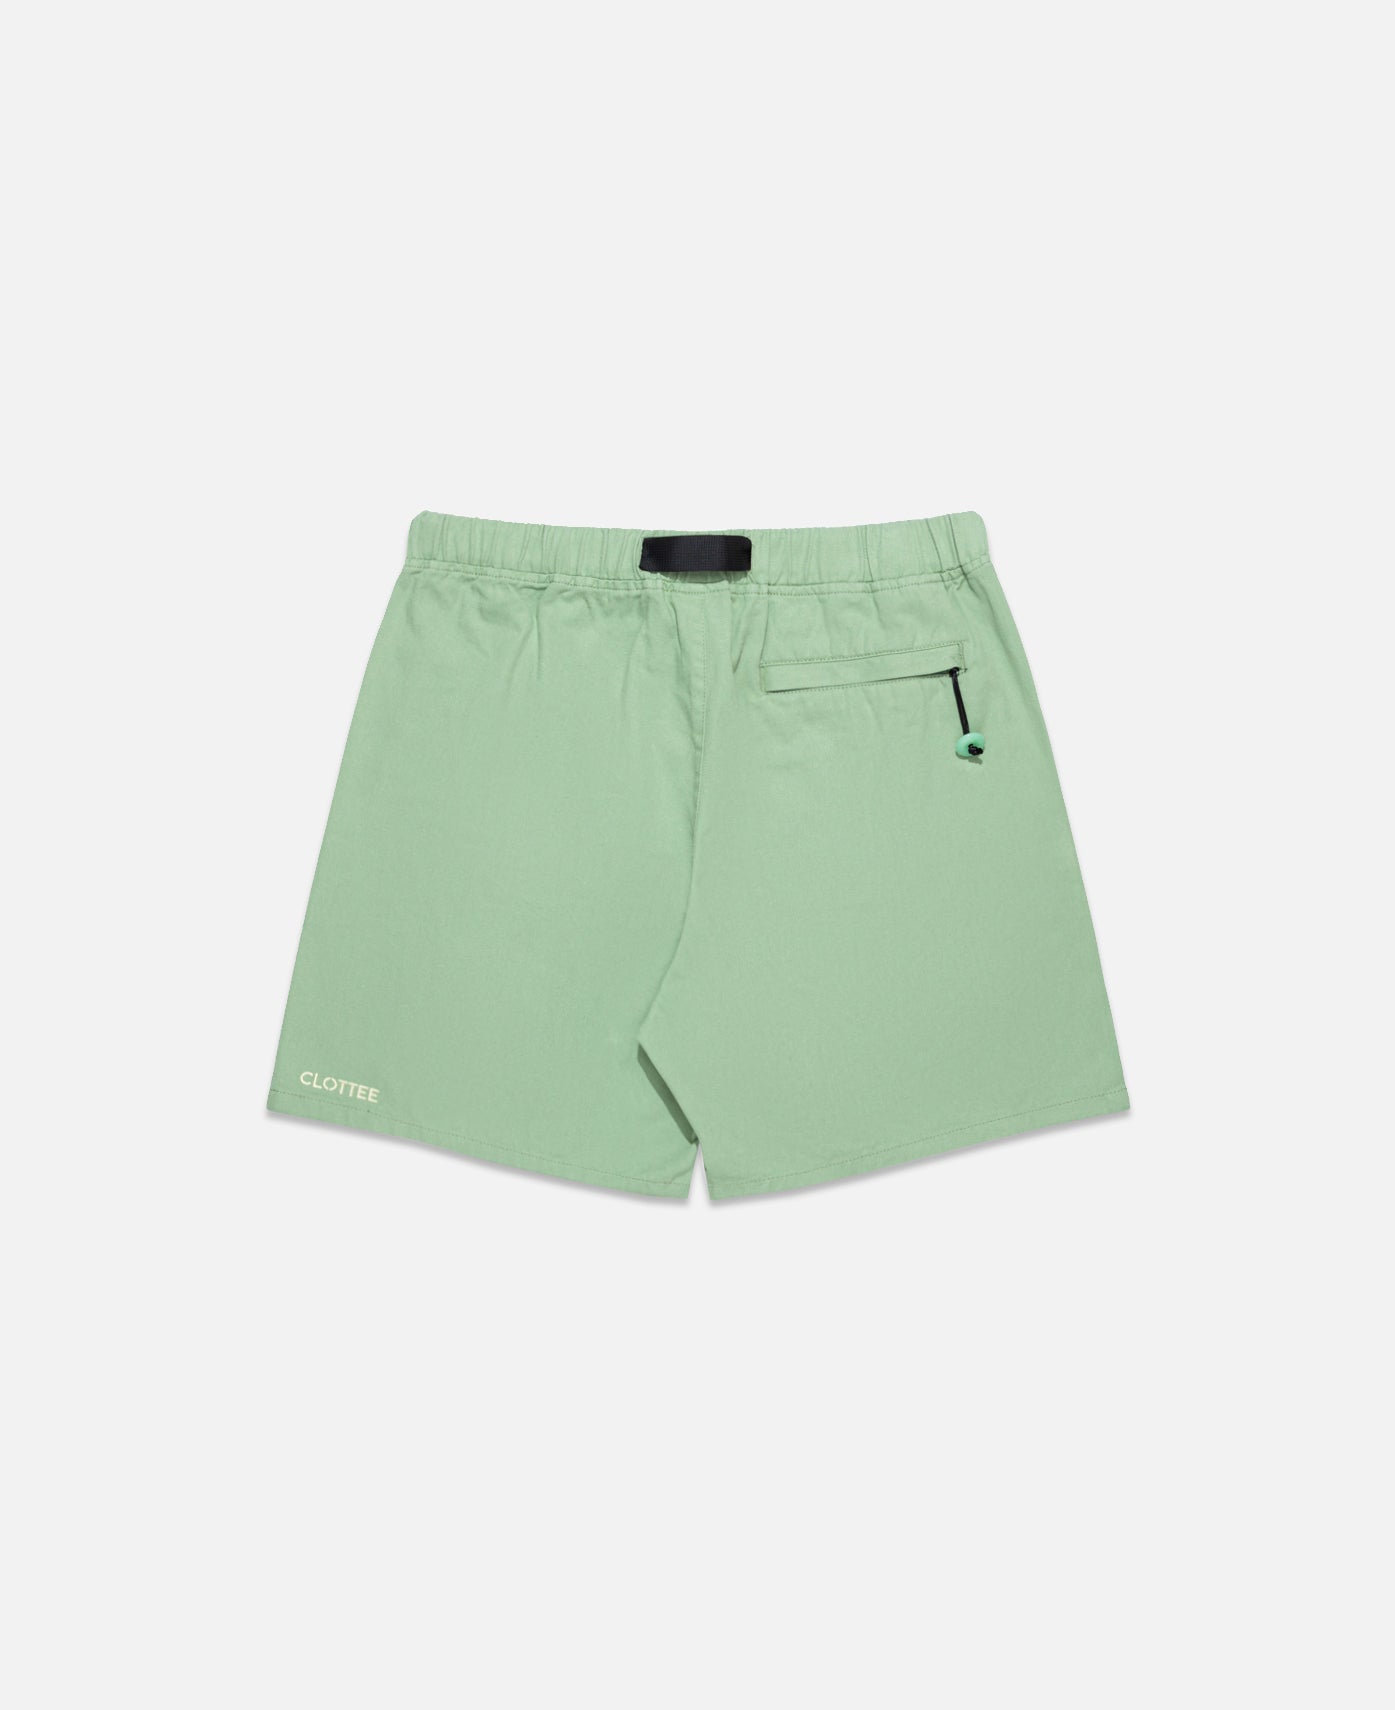 CLOTTEE - Belted Shorts (Mint) – JUICESTORE